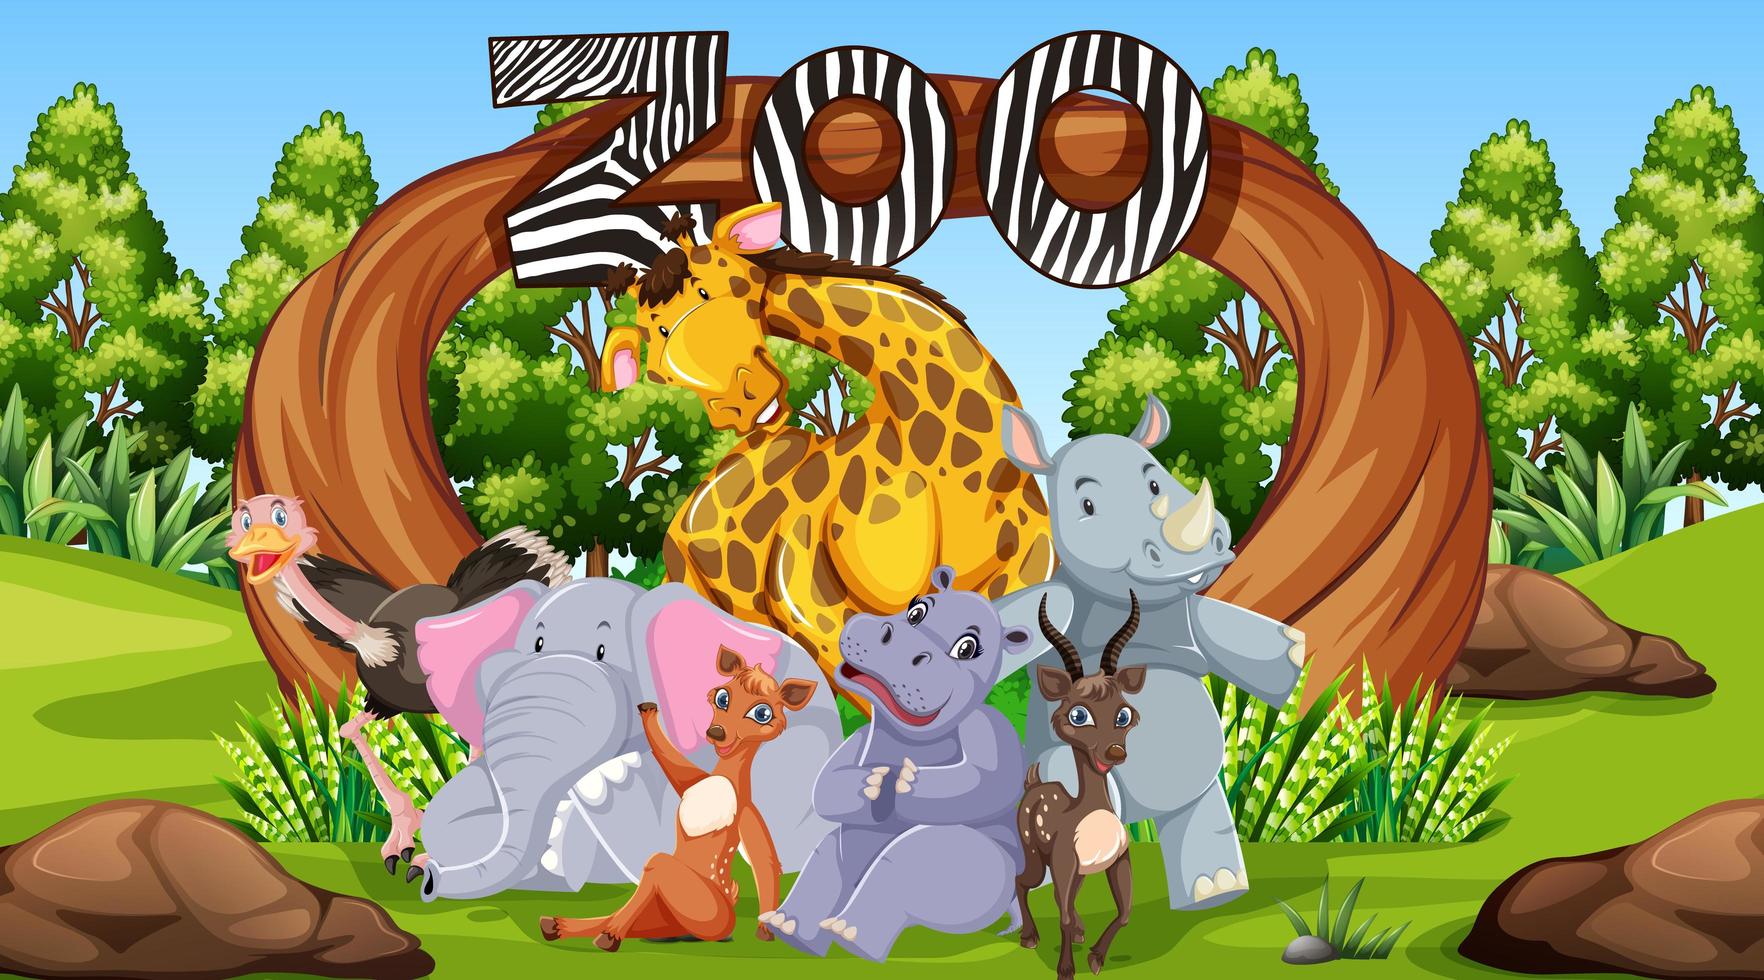 Zoo animals in the wild nature vector